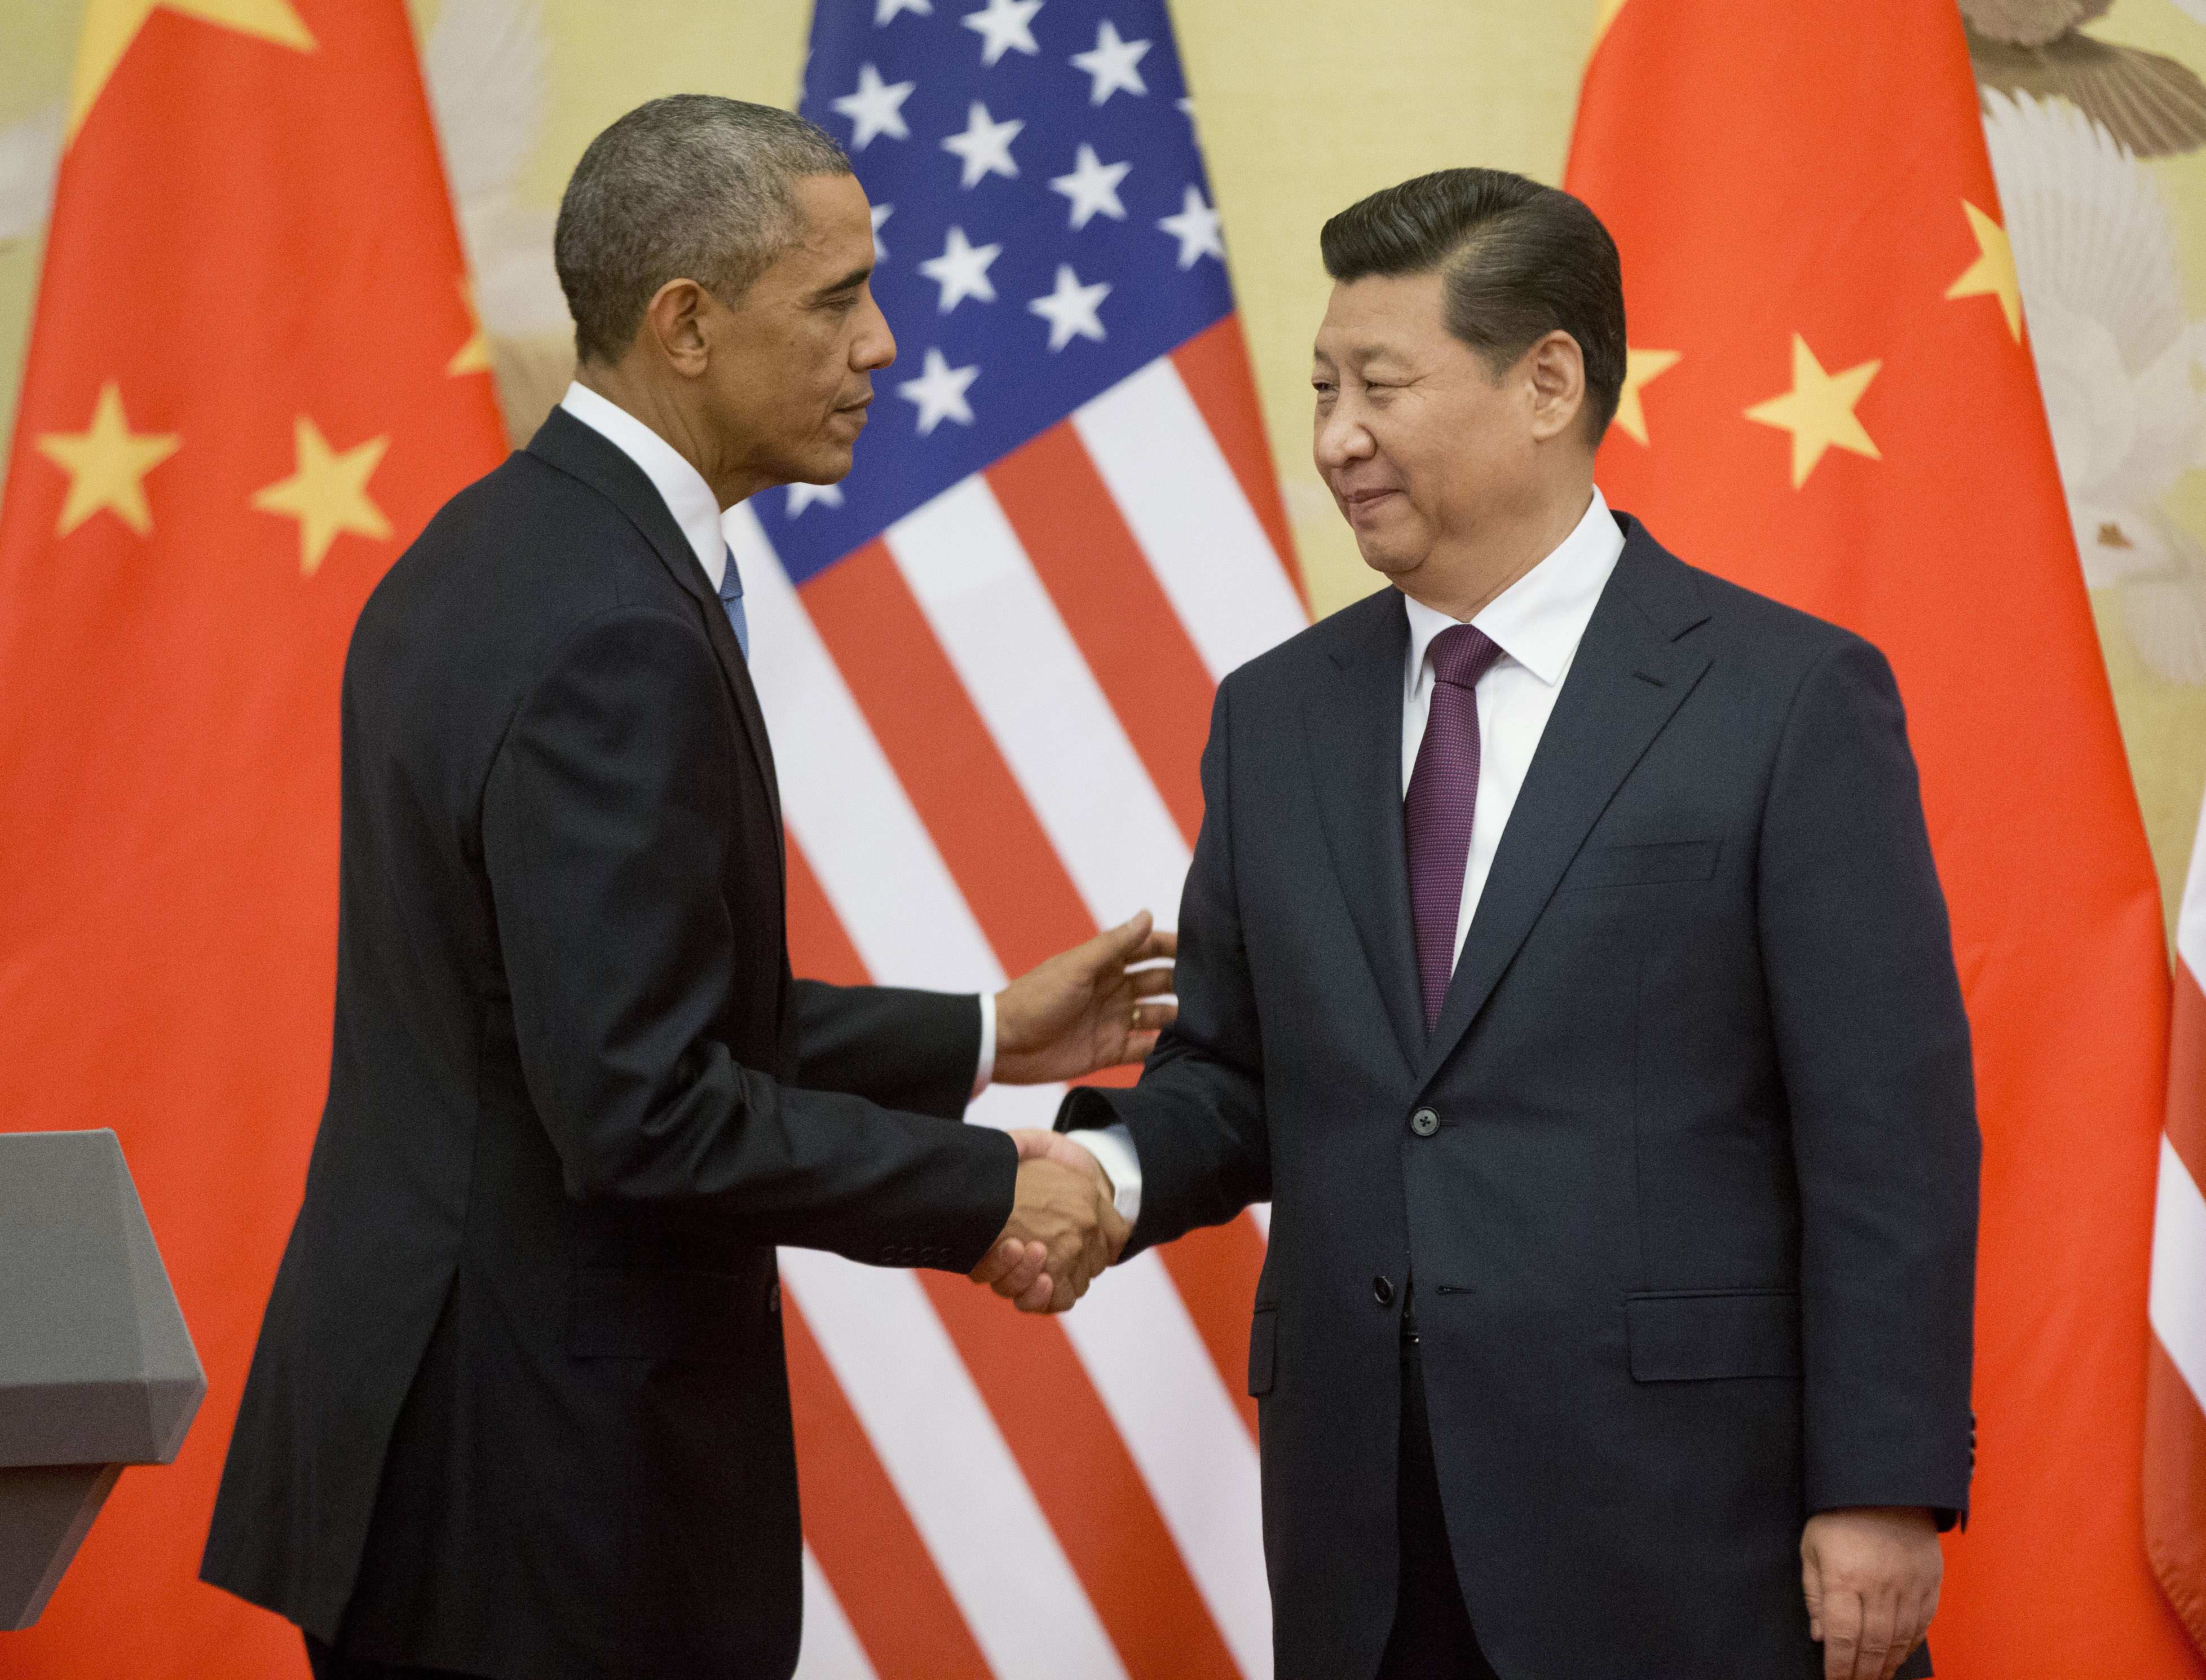 FILE - In this Nov. 12, 2014 file photo, President Barack Obama shakes hands with Chinese President Xi Jinping at the conclusion of their joint news conference at the Great Hall of the People in Beijing. Six countries produce nearly 60 percent of global carbon dioxide emissions. China and the United States combine for more than two-fifths. The planetís future will be shaped by what these top carbon polluters do about the heat-trapping gases blamed for global warming. (AP Photo/Pablo Martinez Monsivais, File)